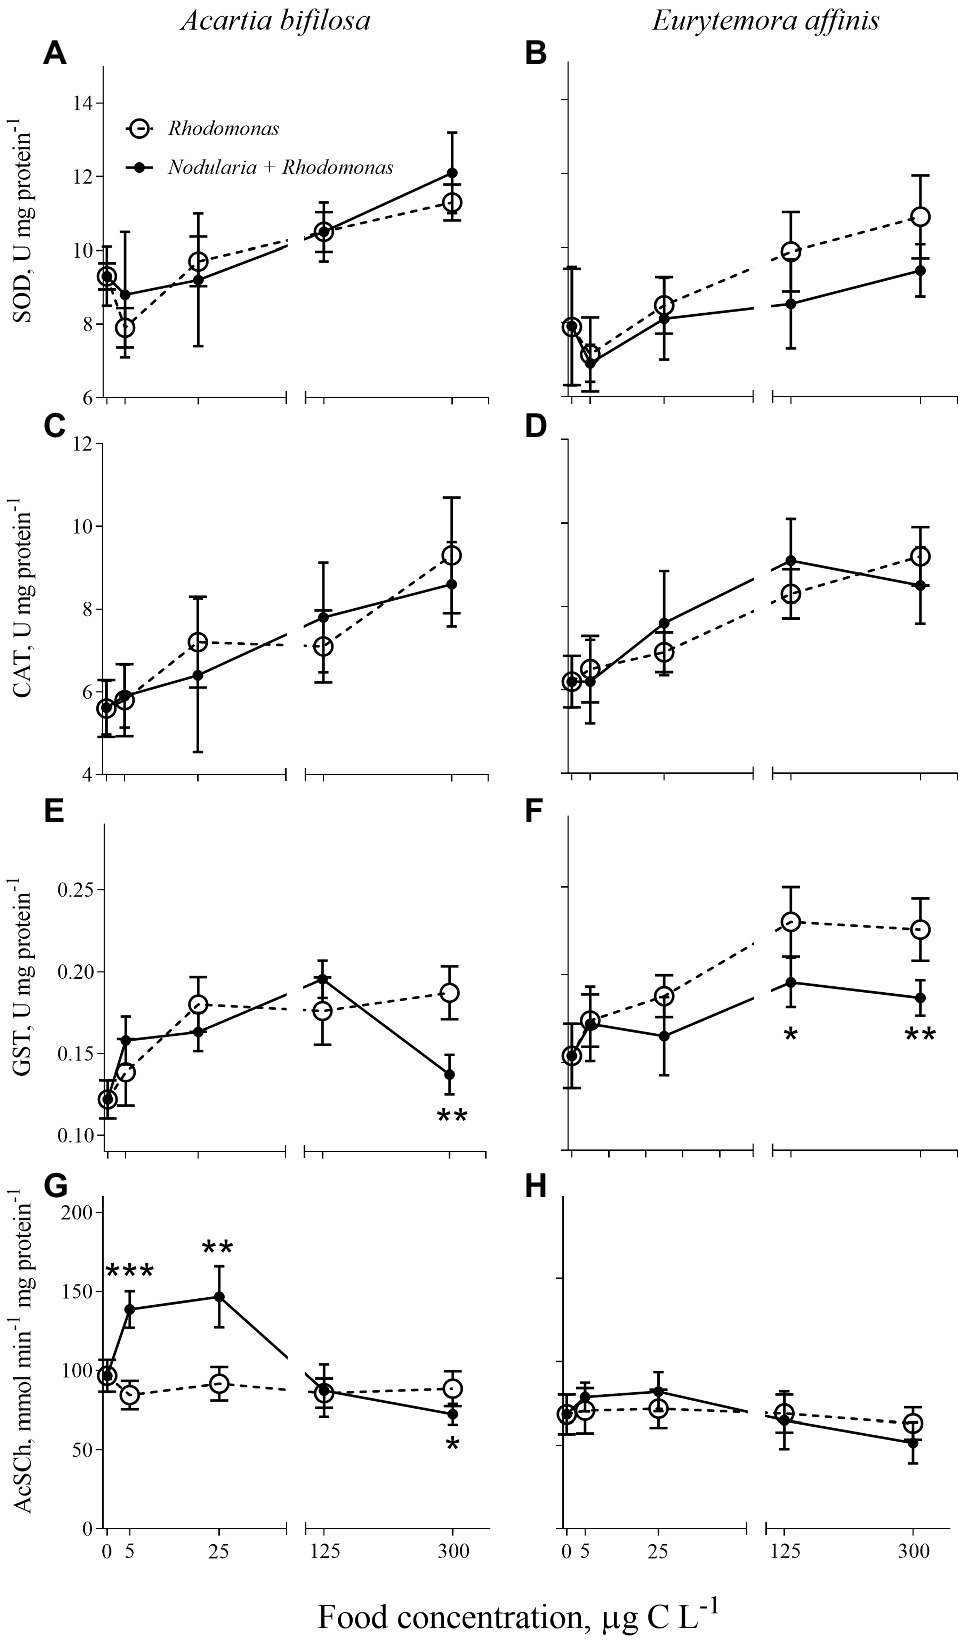 Frontiers | Antioxidant Responses in Driven Primarily by Food Intake, Not by Toxin-Producing Cyanobacteria in Diet | Physiology